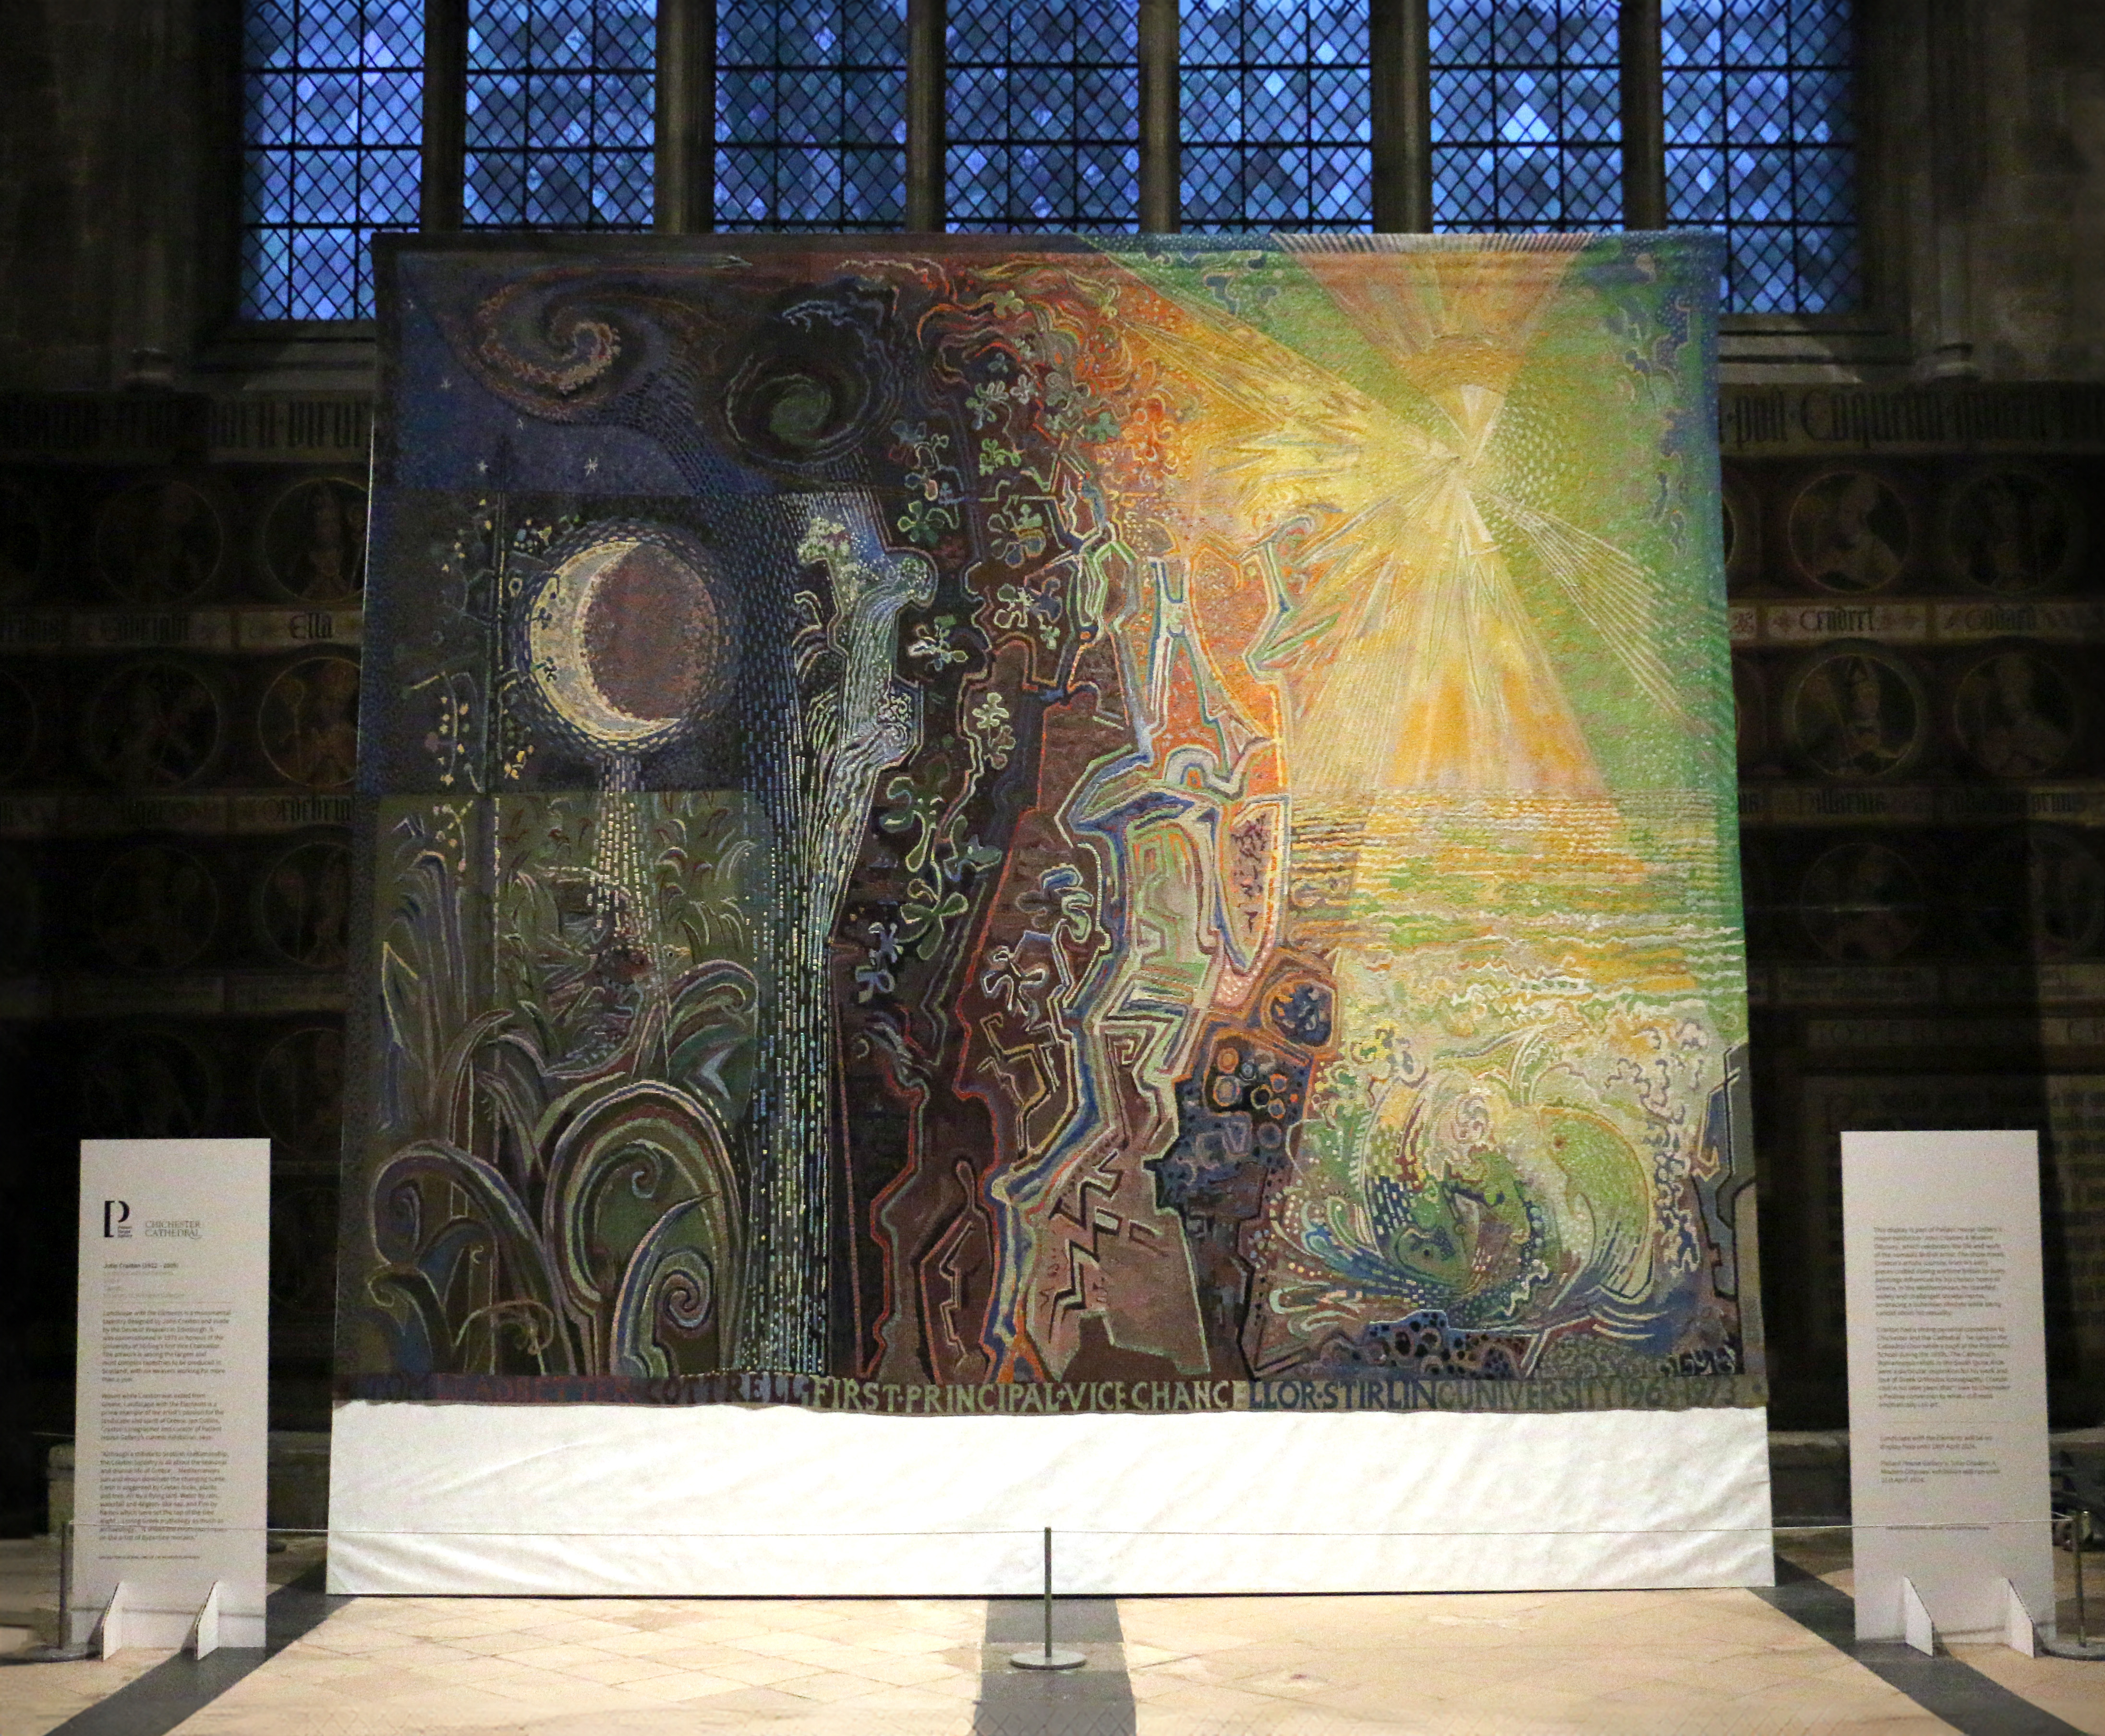 Large tapestry, Landscape with the elements by John Craxton in Cathedral's North Transept